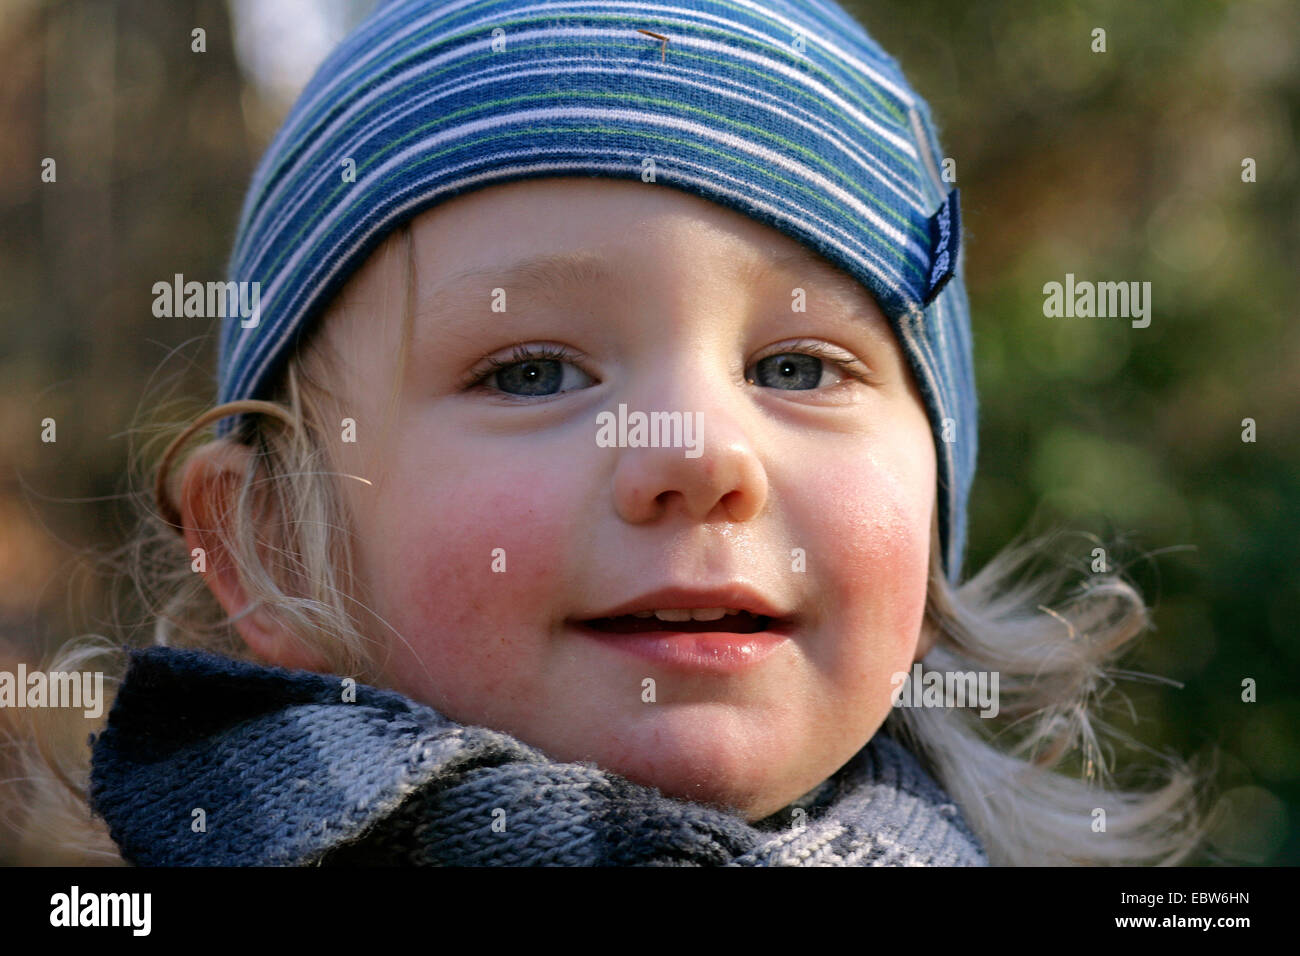 little boy smiling and looking at camera Stock Photo